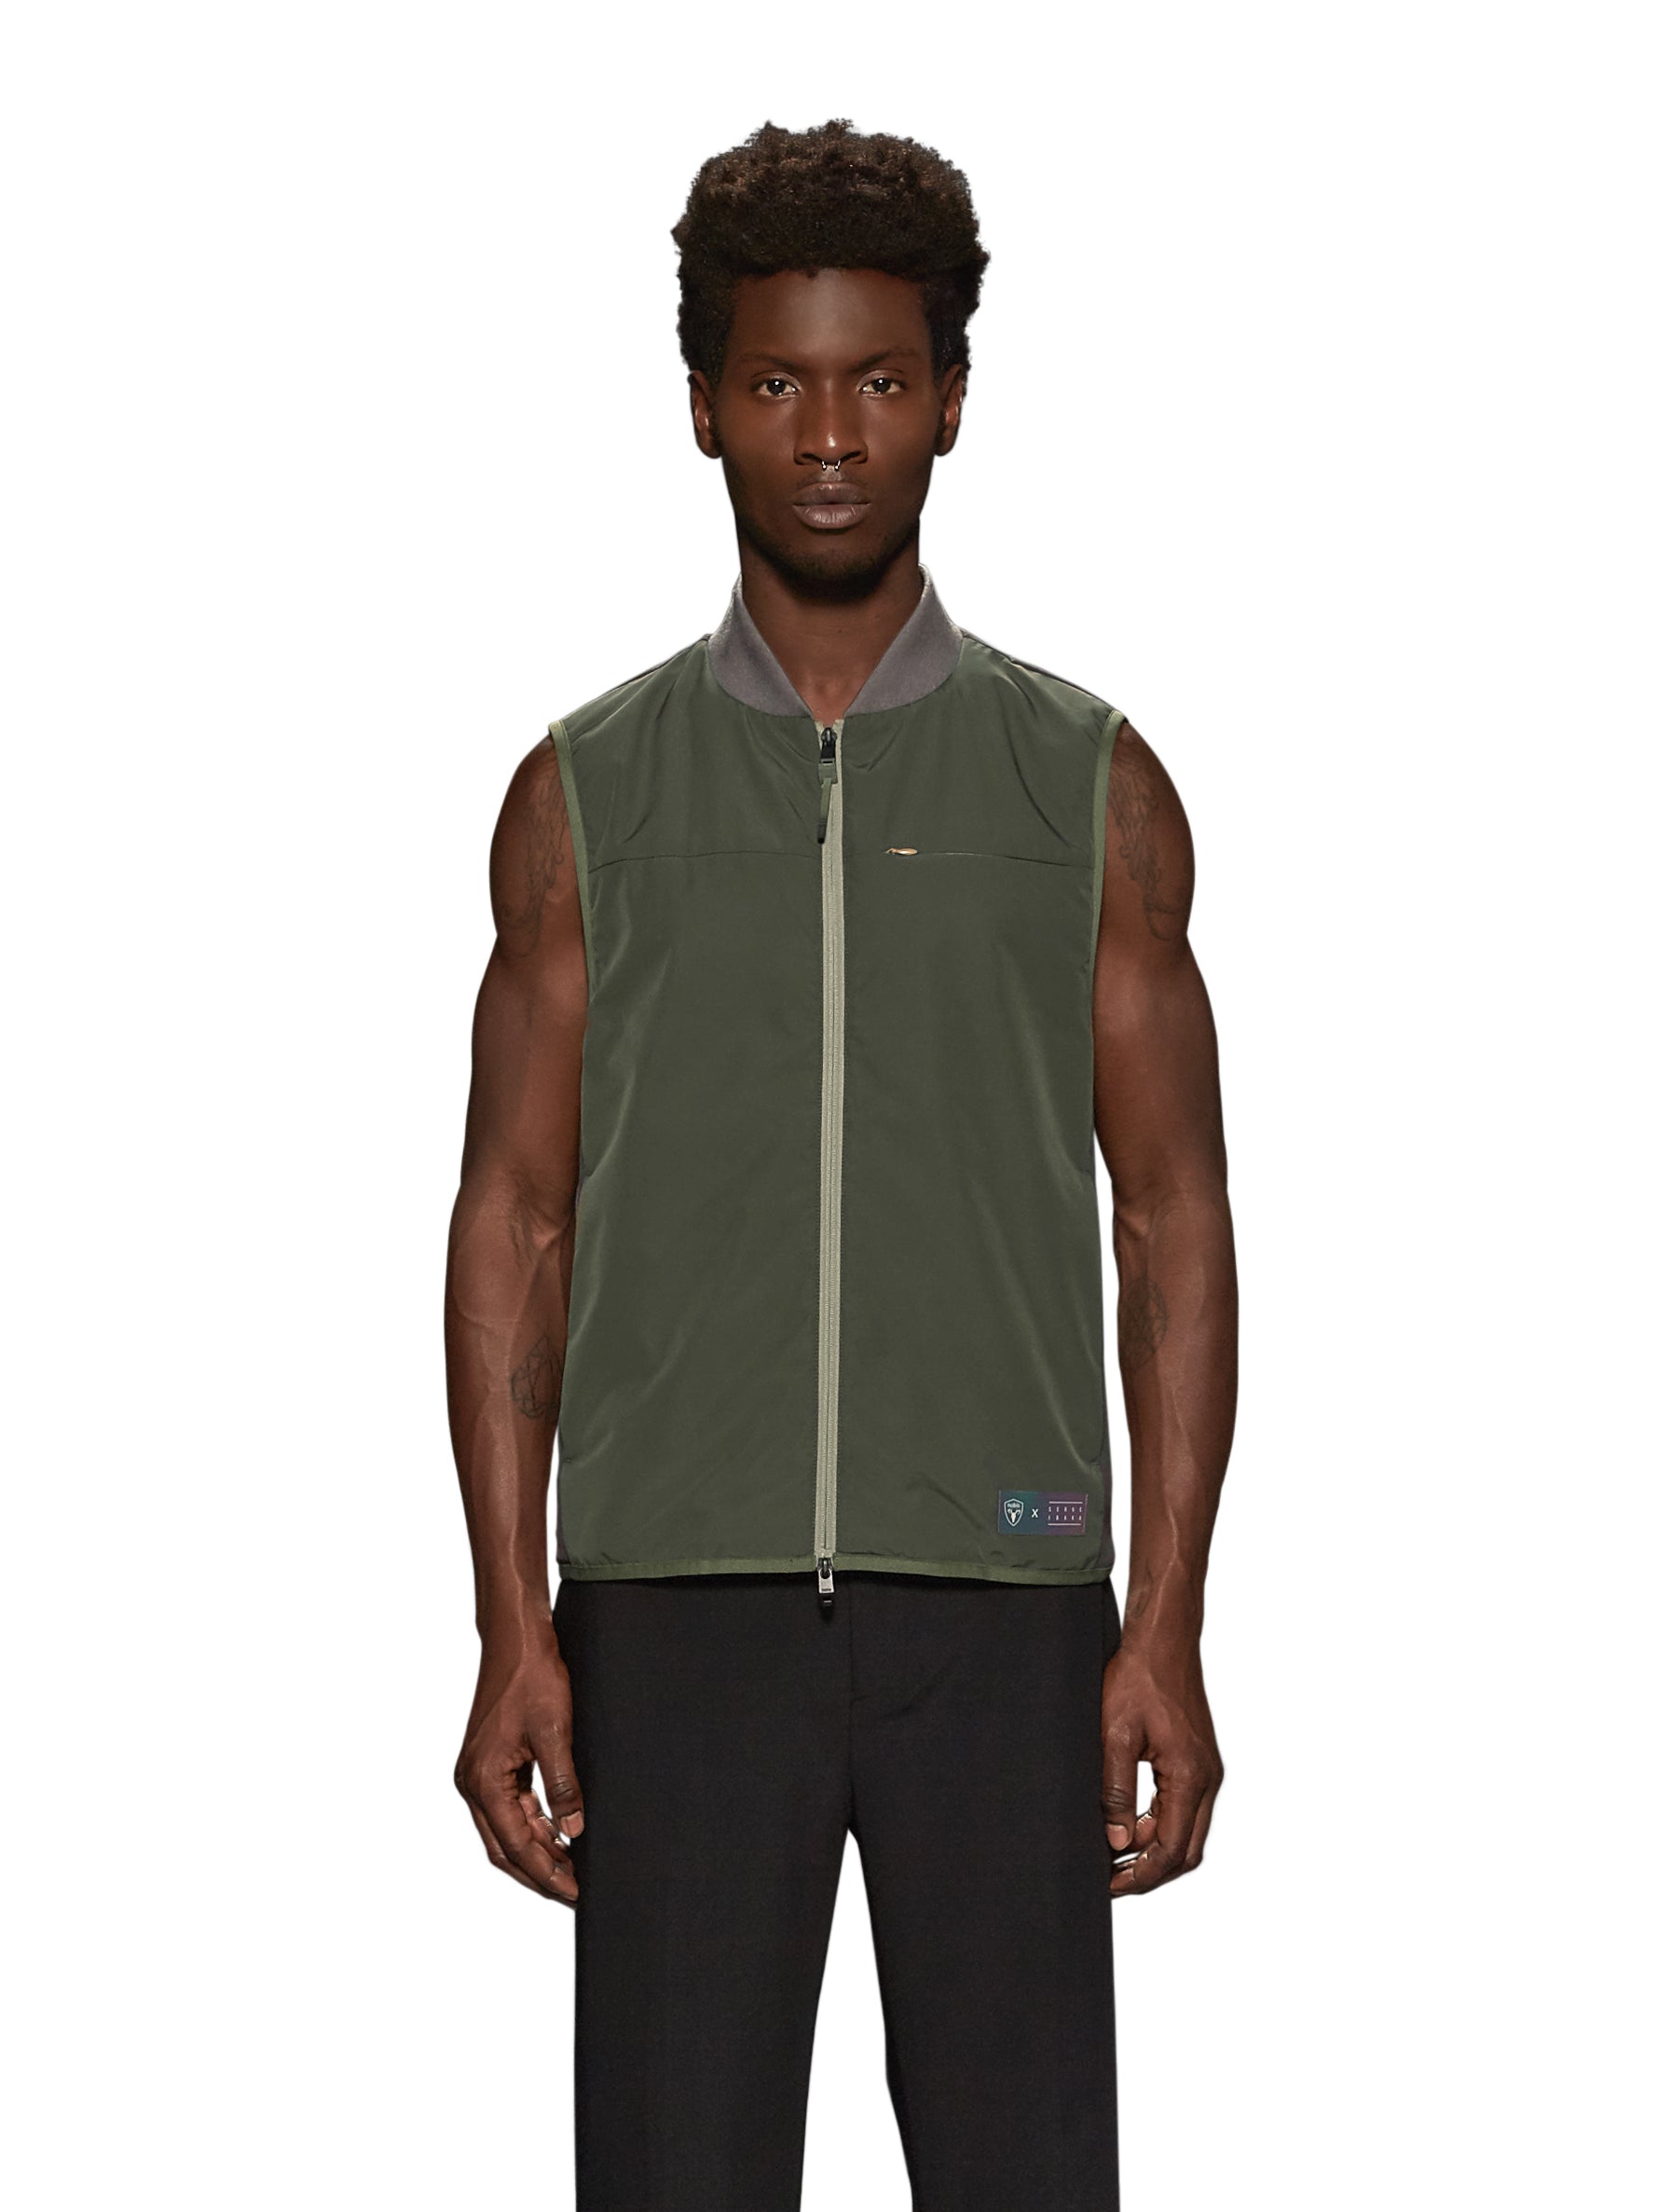 Unisex hip length vest with a contrast colour back panel, and hidden zipper pockets at waist, and an invisible zipper pocket at chest, in Fatigue/Licorice